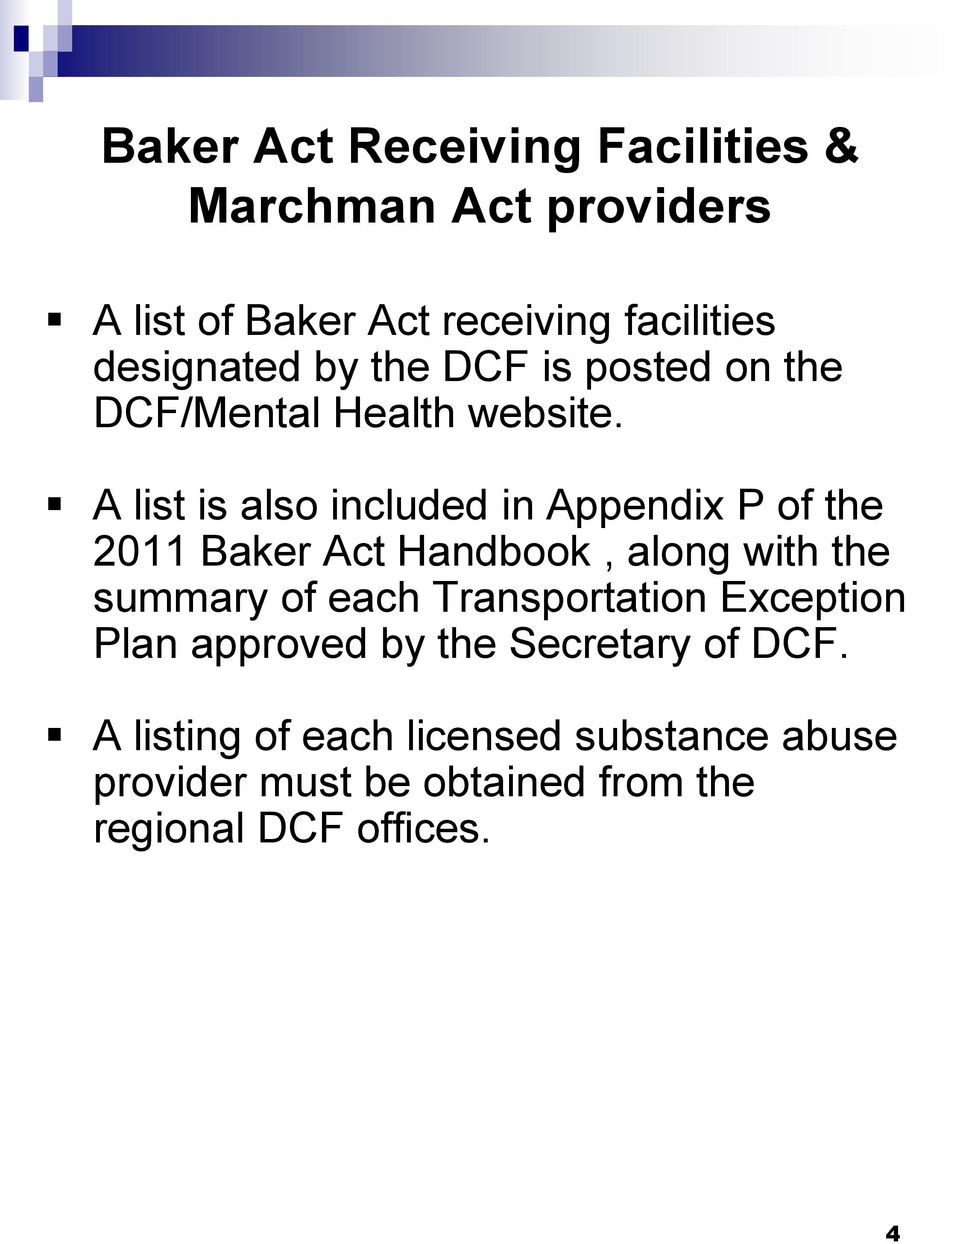 A list is also included in Appendix P of the 2011 Baker Act Handbook, along with the summary of each